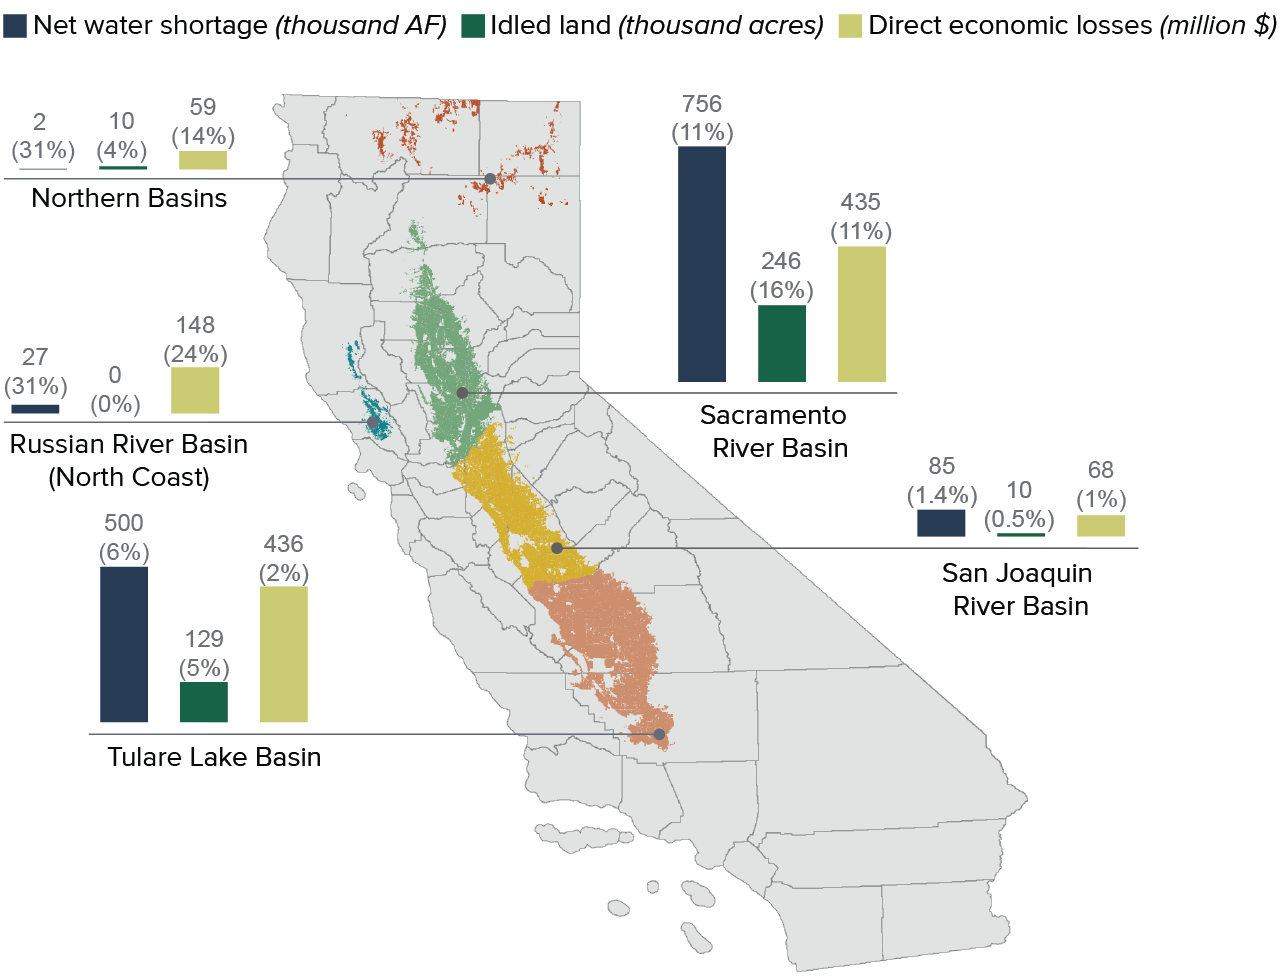 figure - In 2021, the drought hit Sacramento Valley and North Coast agriculture hardest as a share of crop revenues